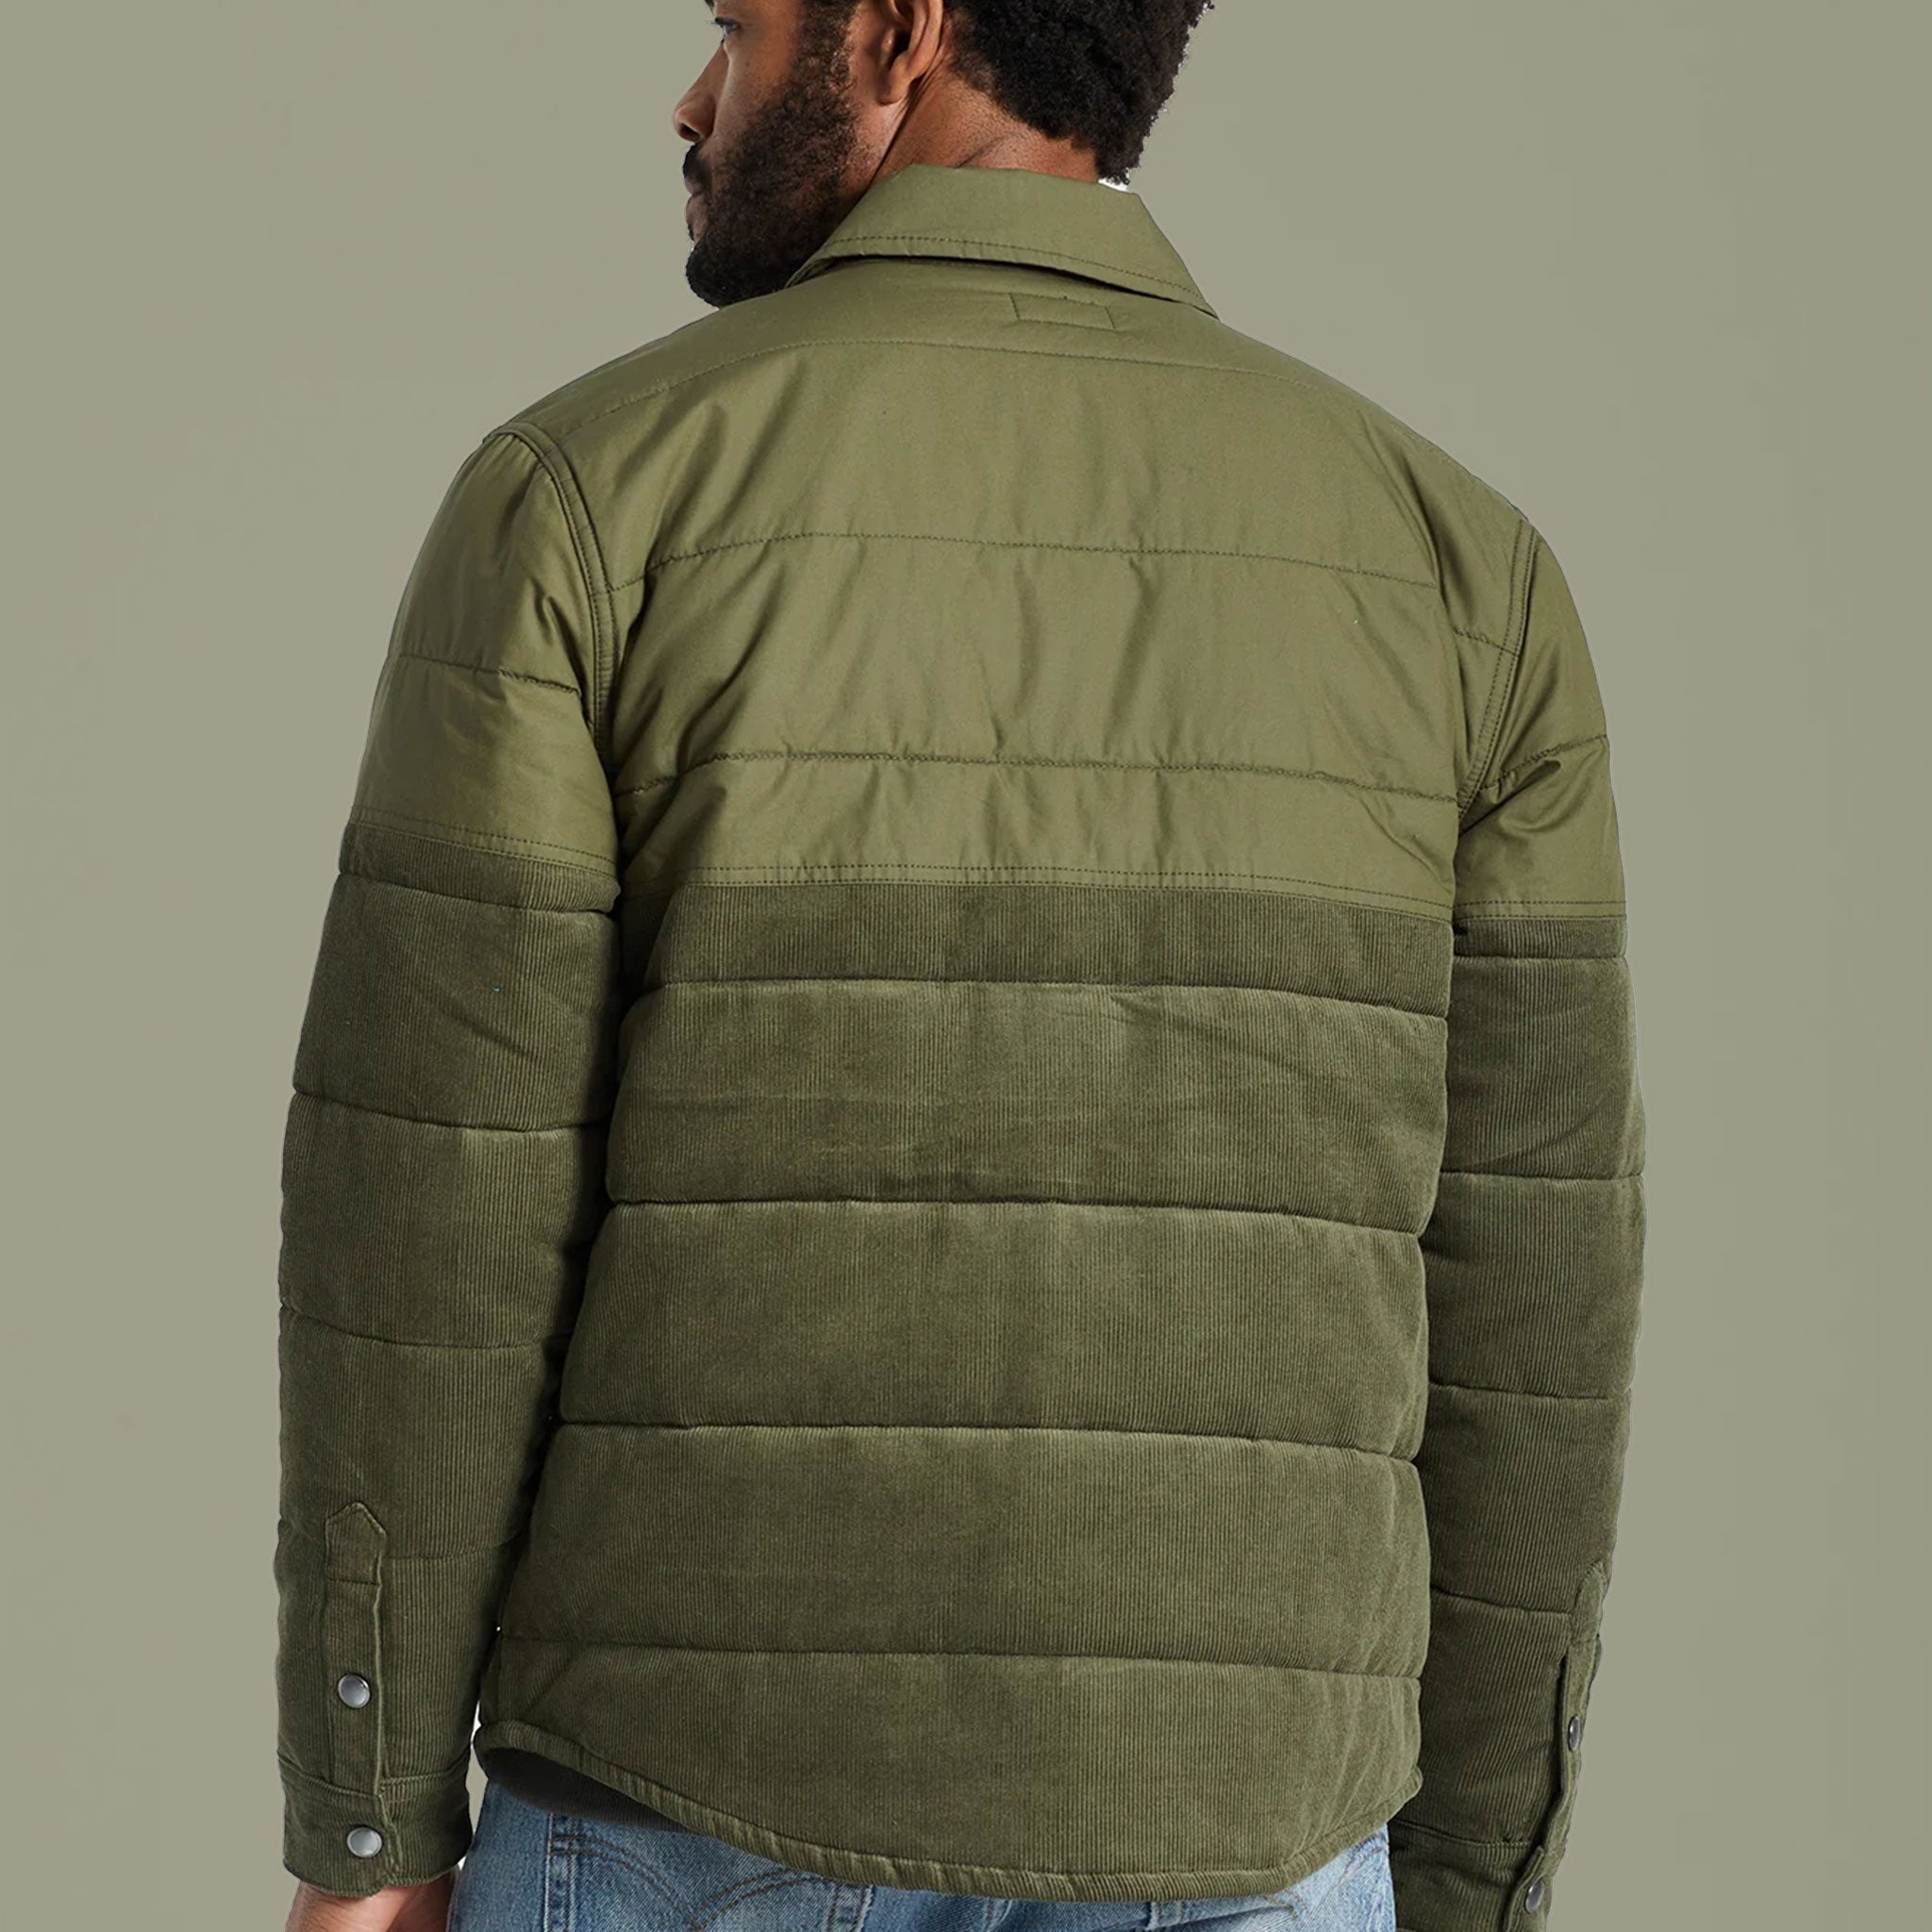 On a white background is a model wearing an olive green jacket with half corduroy material.